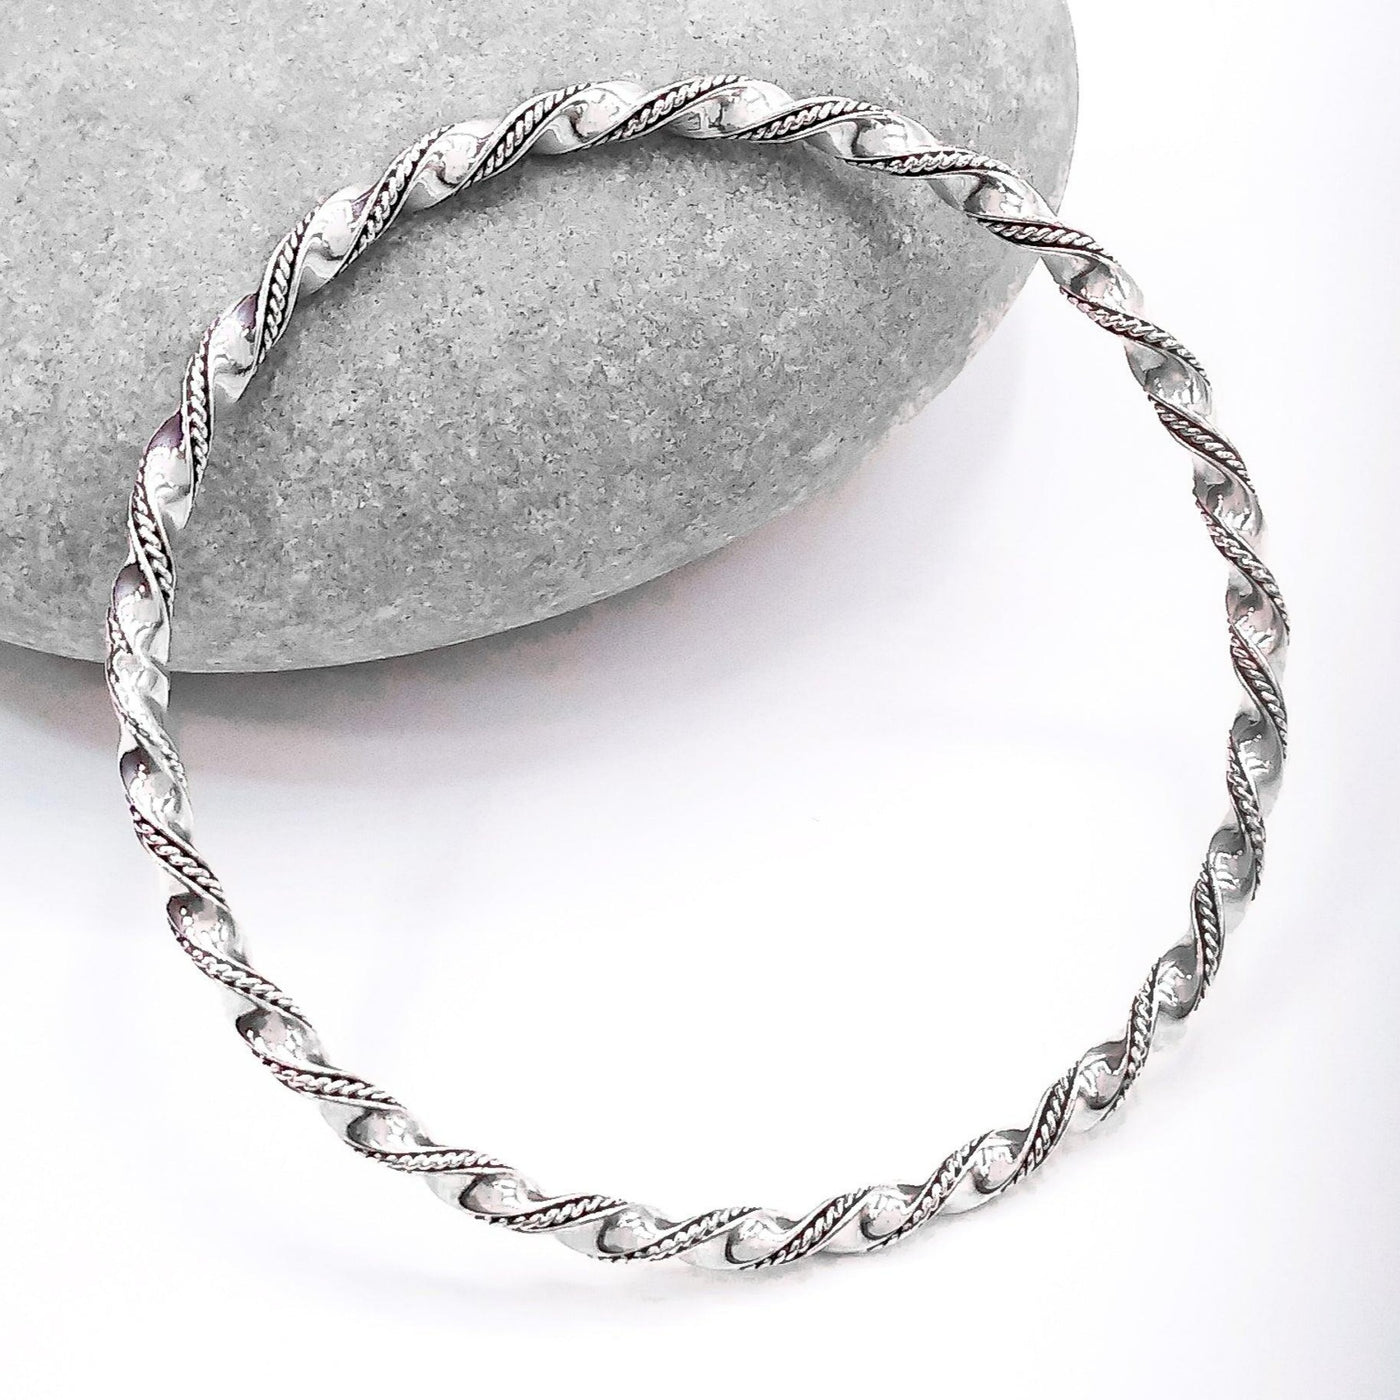 Sterling Silver Wire Twist Bangle - the silver is in a large twist pattern with a small braid pattern running between the twists